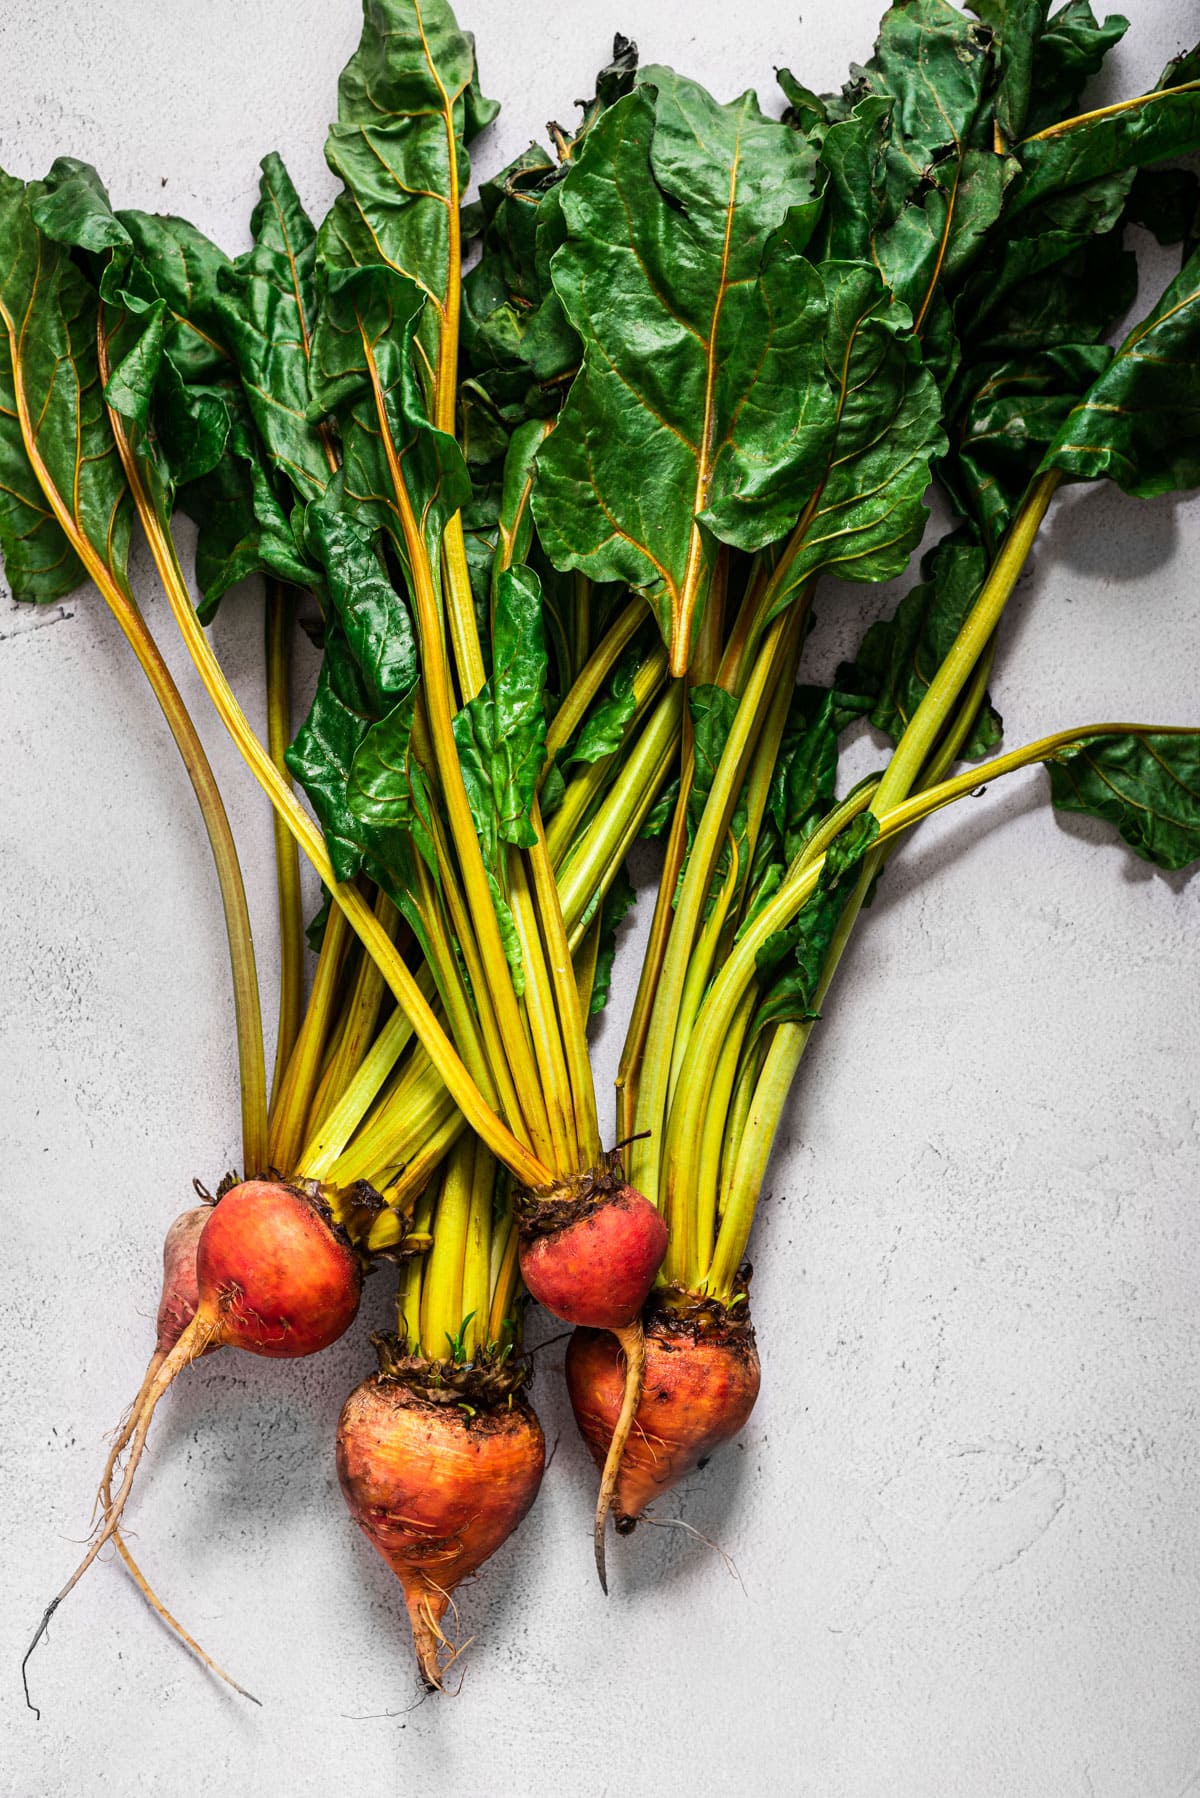 bunch of beets with greens on light background